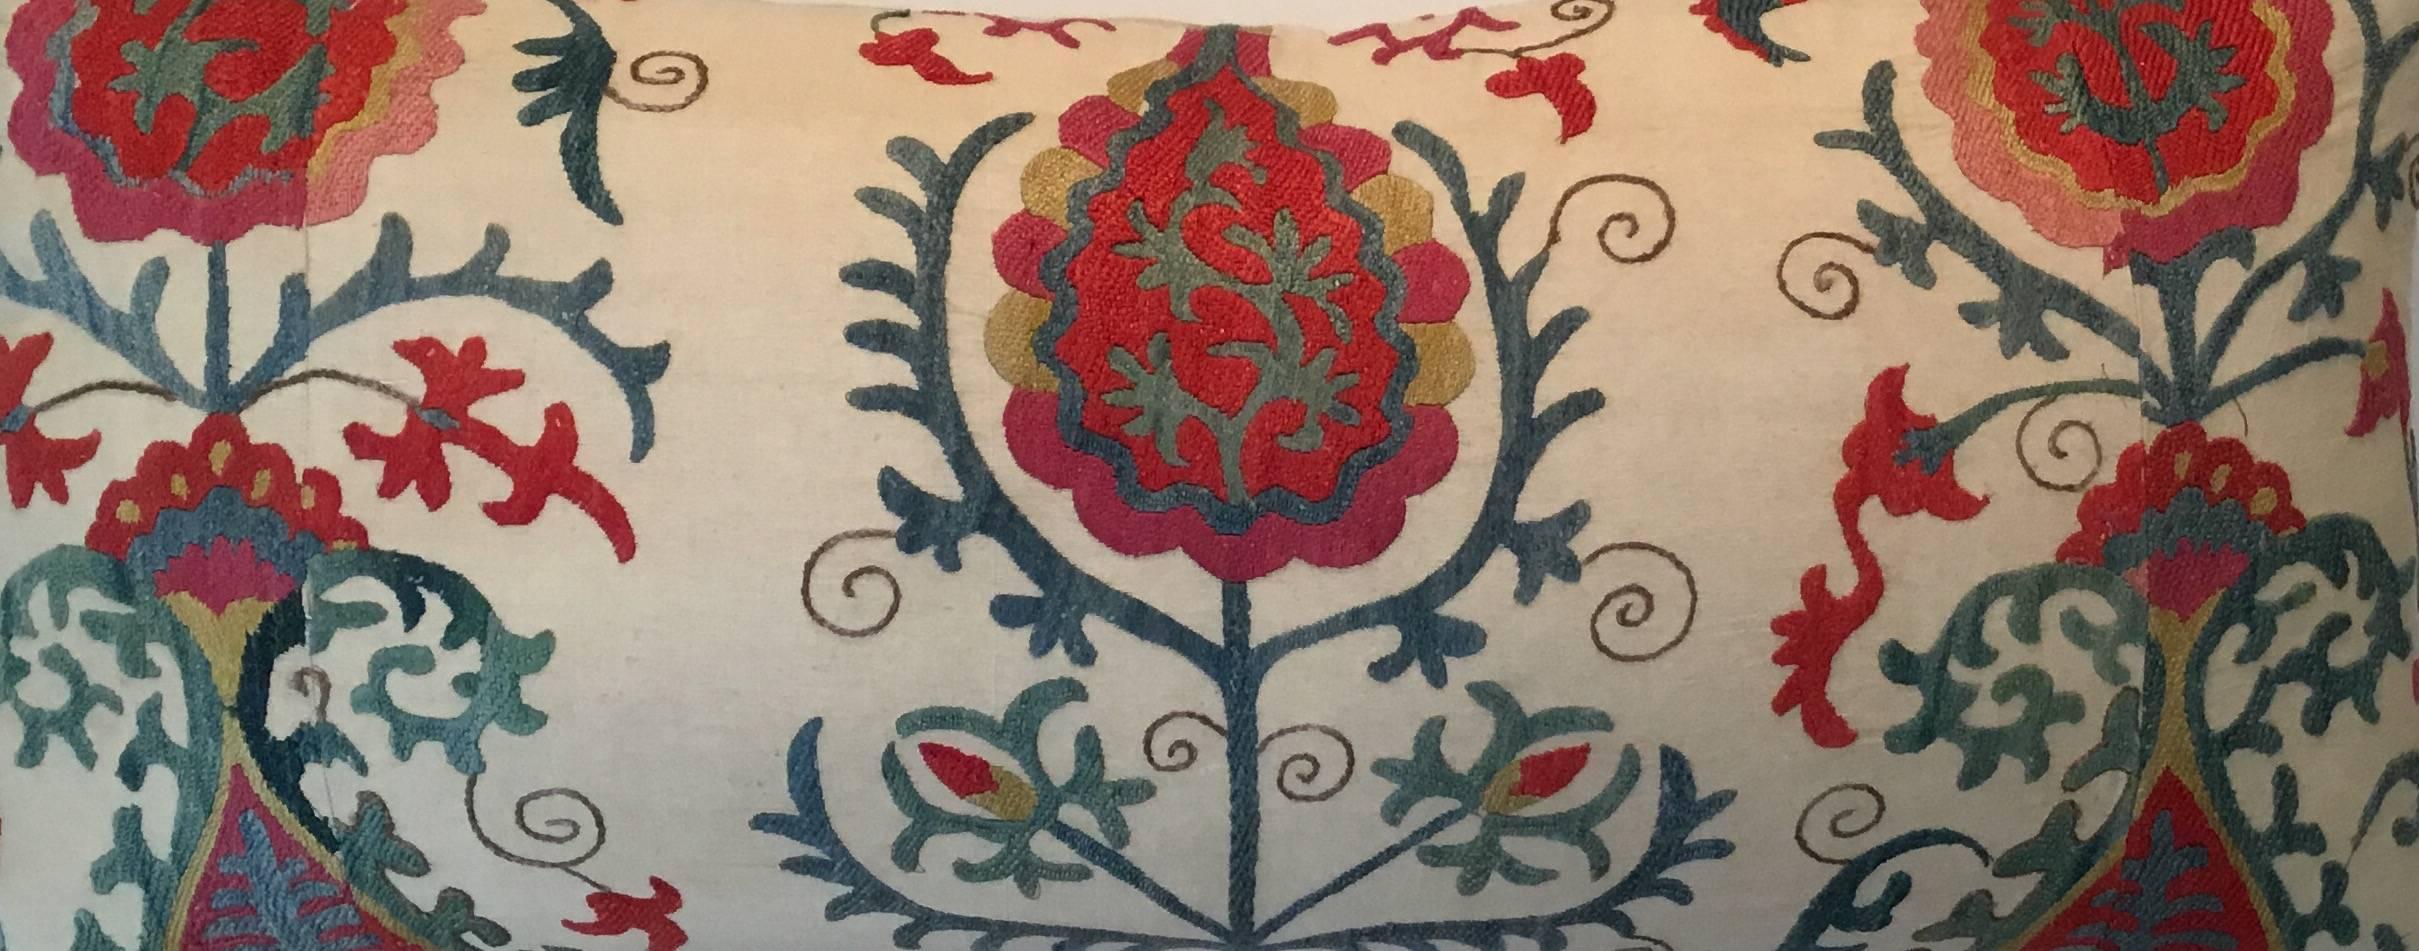 Beautiful Suzani pillow made of hand embroidery silk on cream cotton background with floral and vine motifs.
Fine linen backing.
Frash inserts, down and feather.